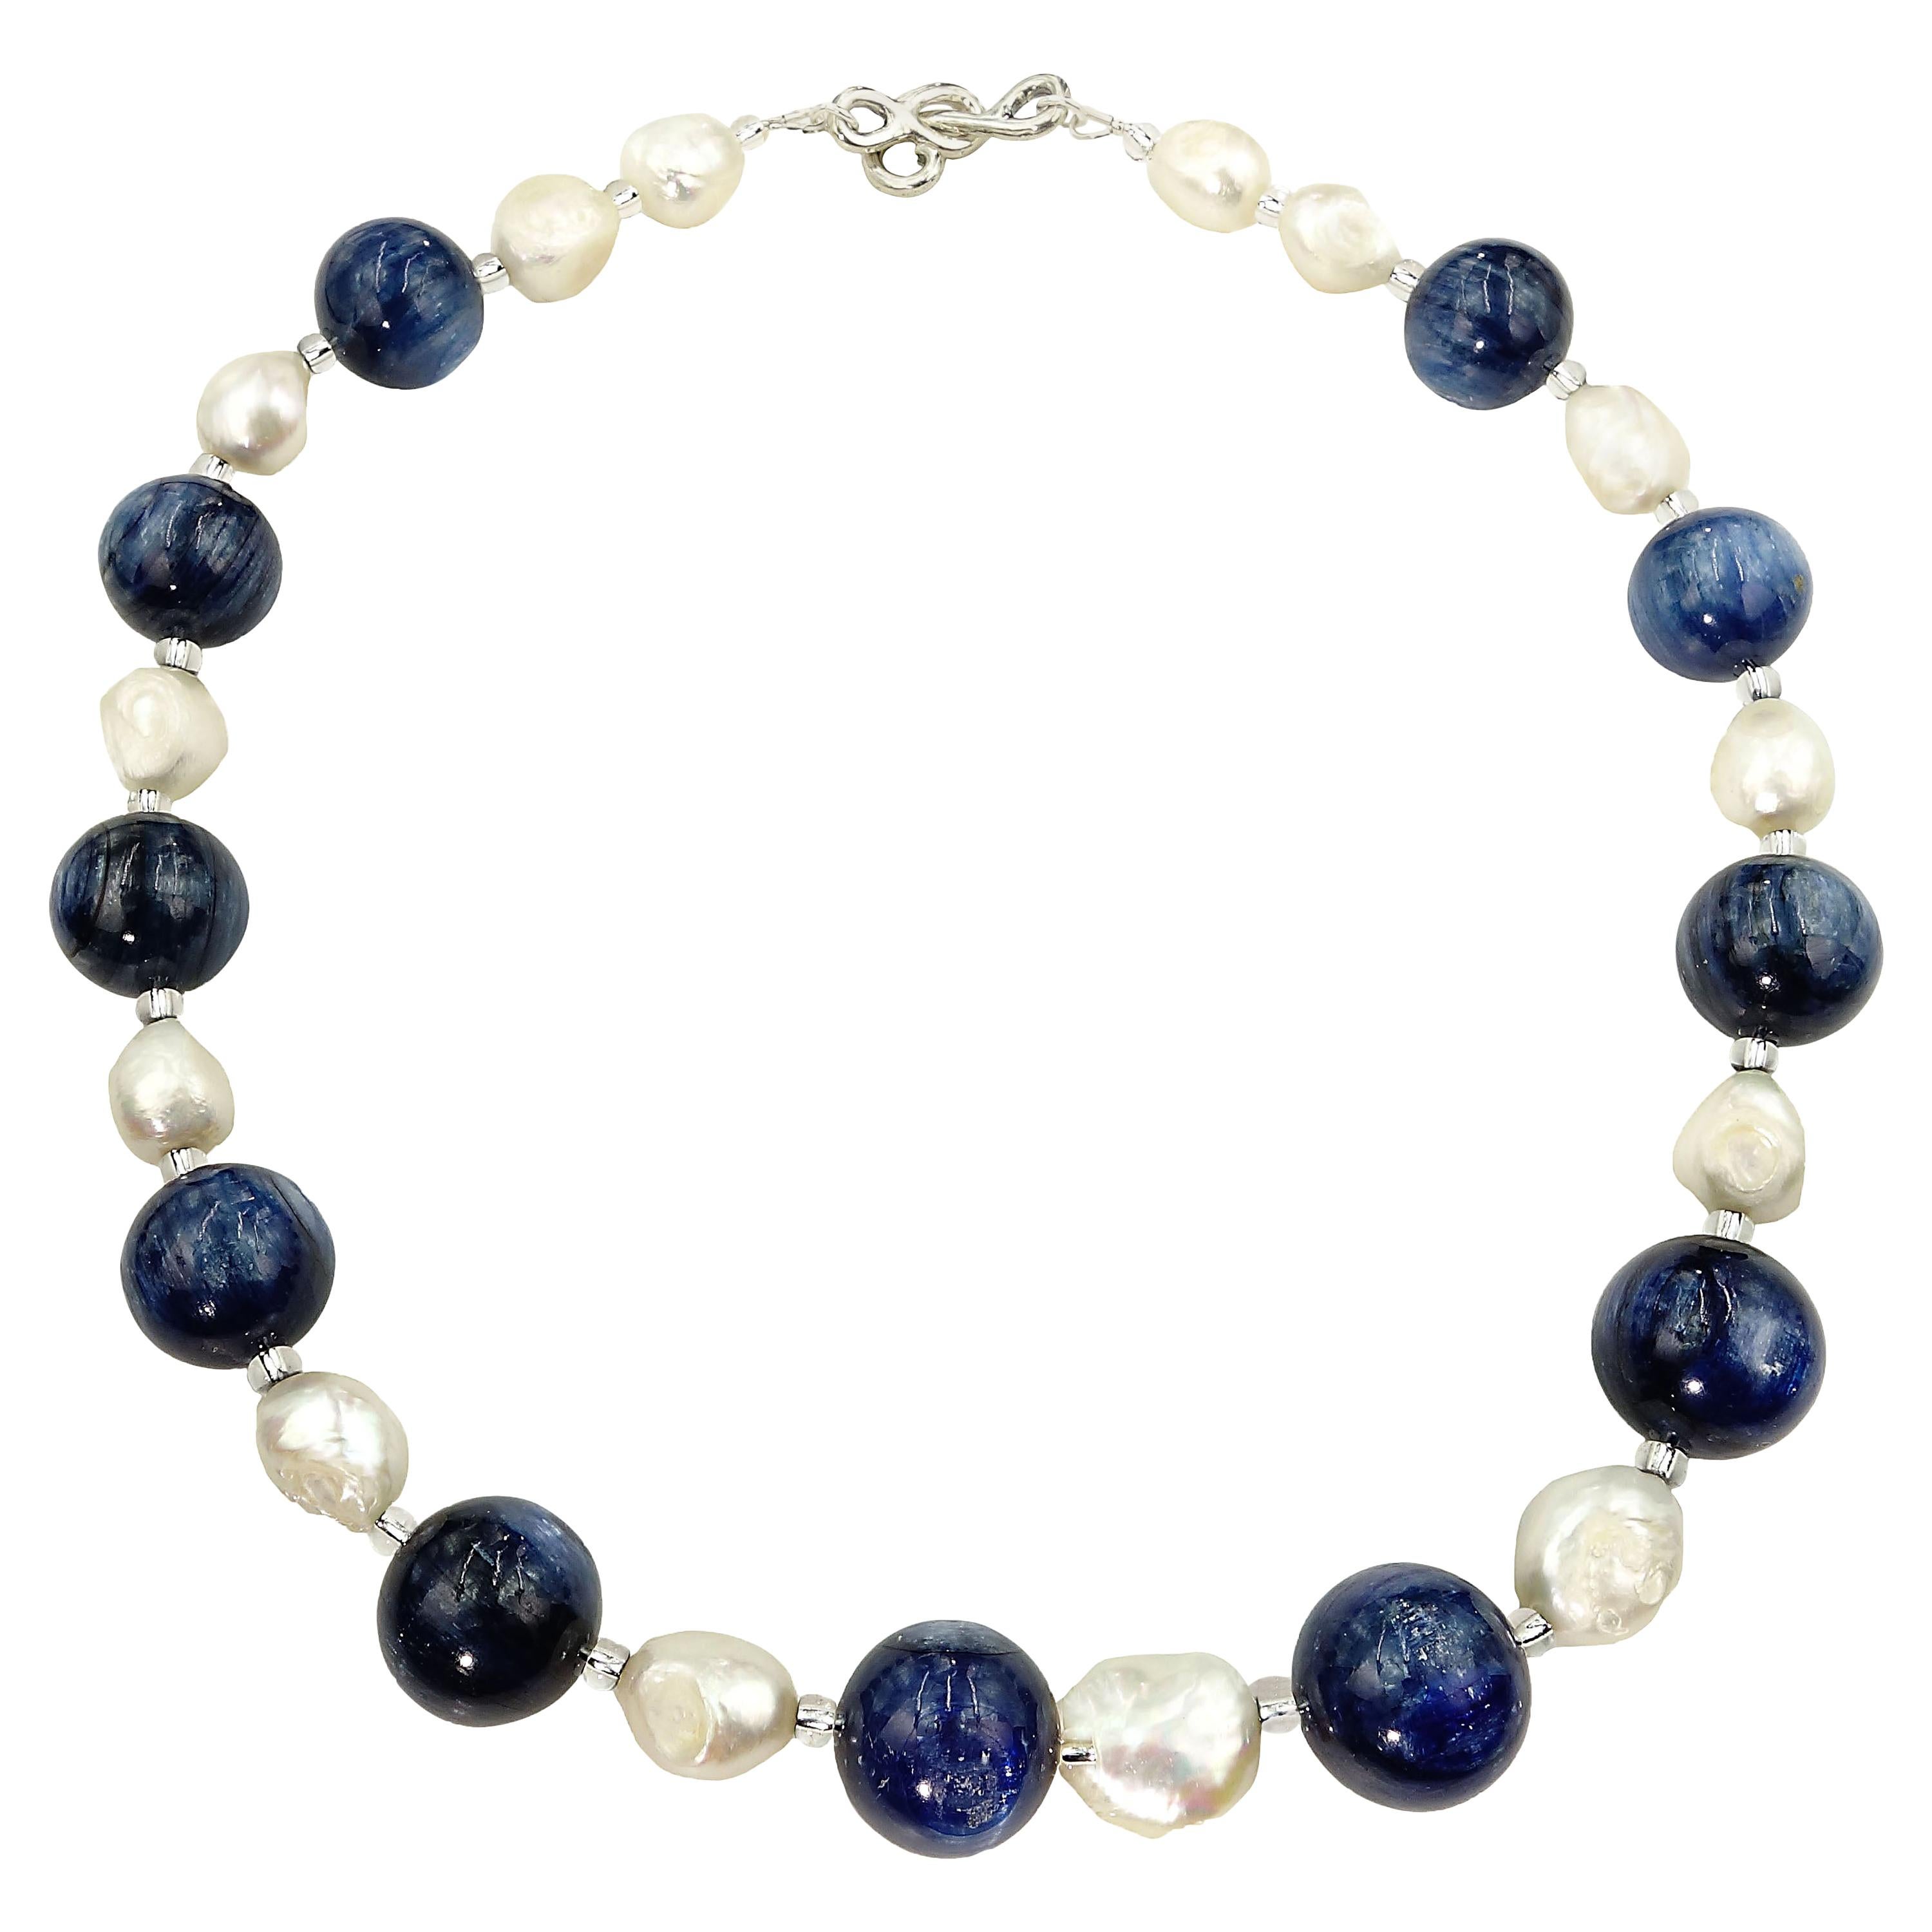 Artisan AJD Statement Blue Kyanite and White Baroque Pearl Necklace